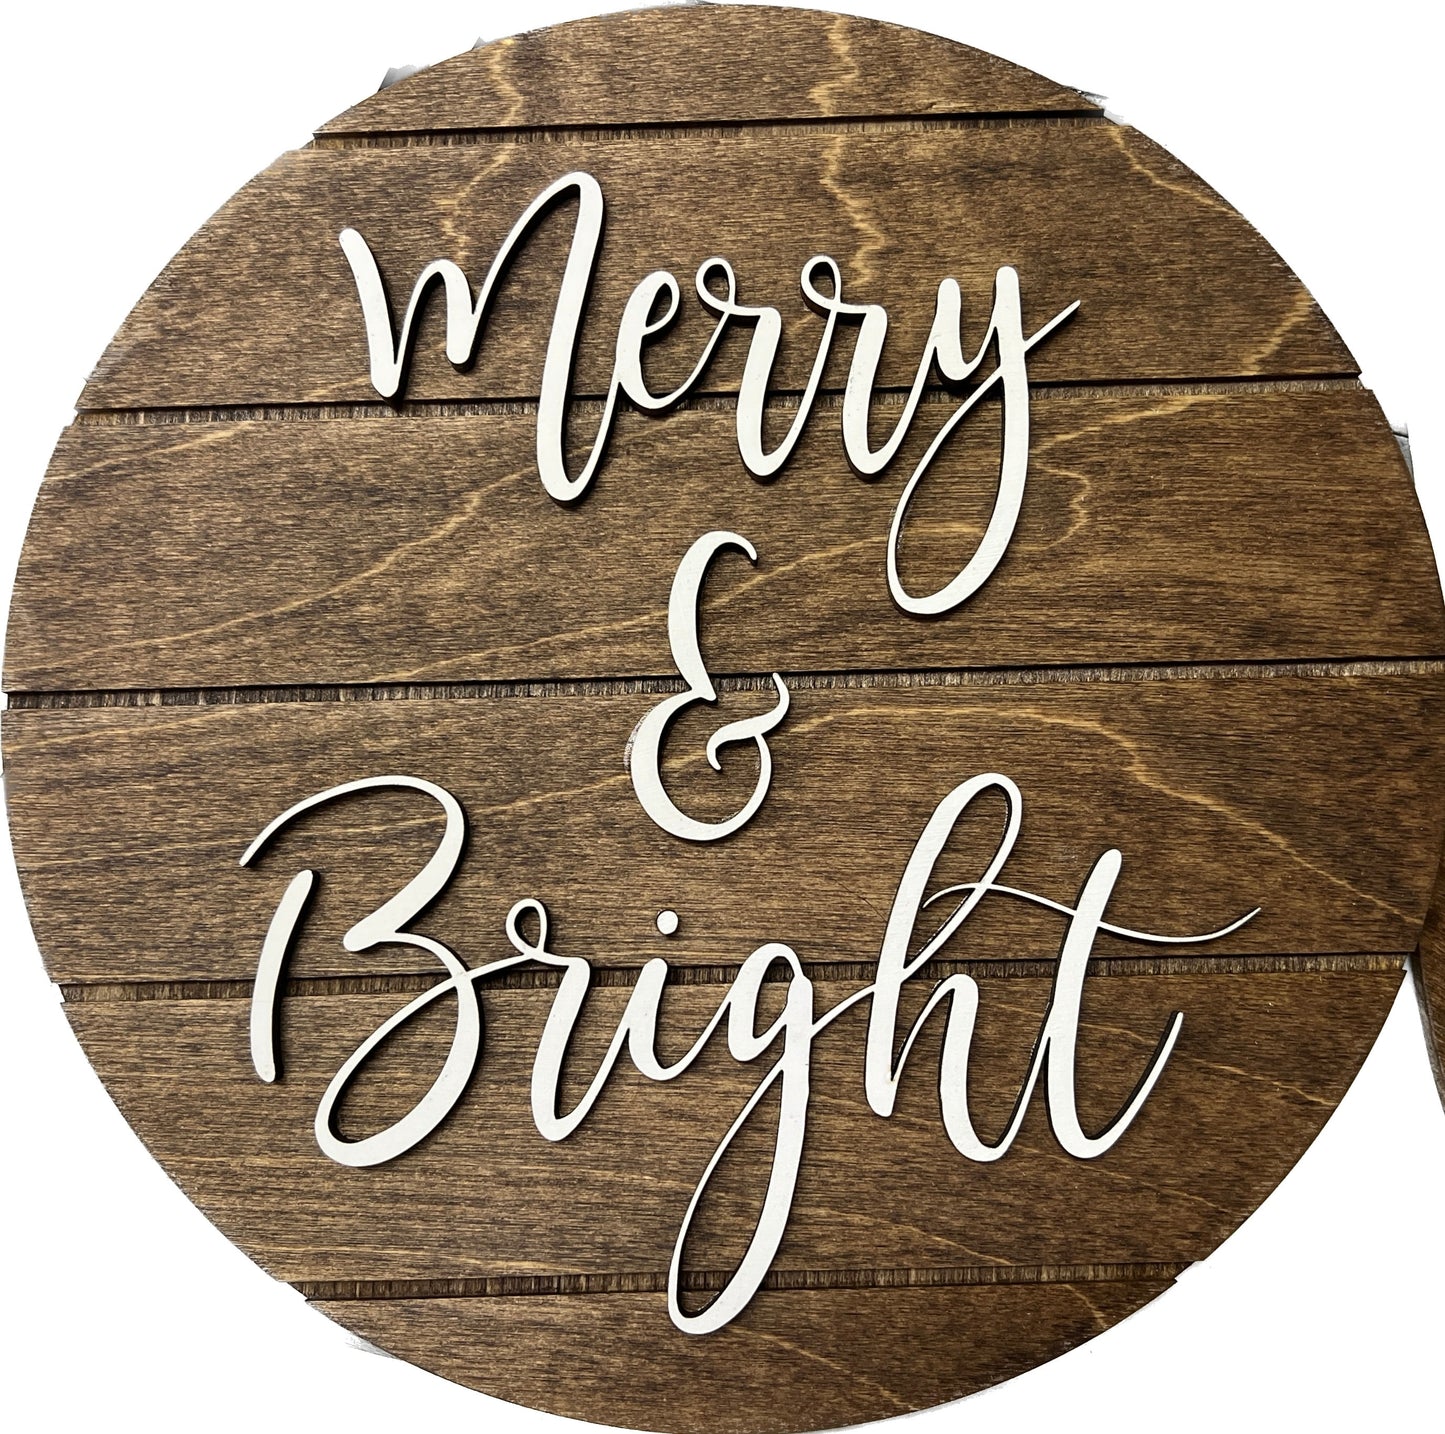 Merry & bright sign, Christmas decorations, 3D holiday decor, wood signs, living room wooden sign wall hanging, patio porch or mantel decor